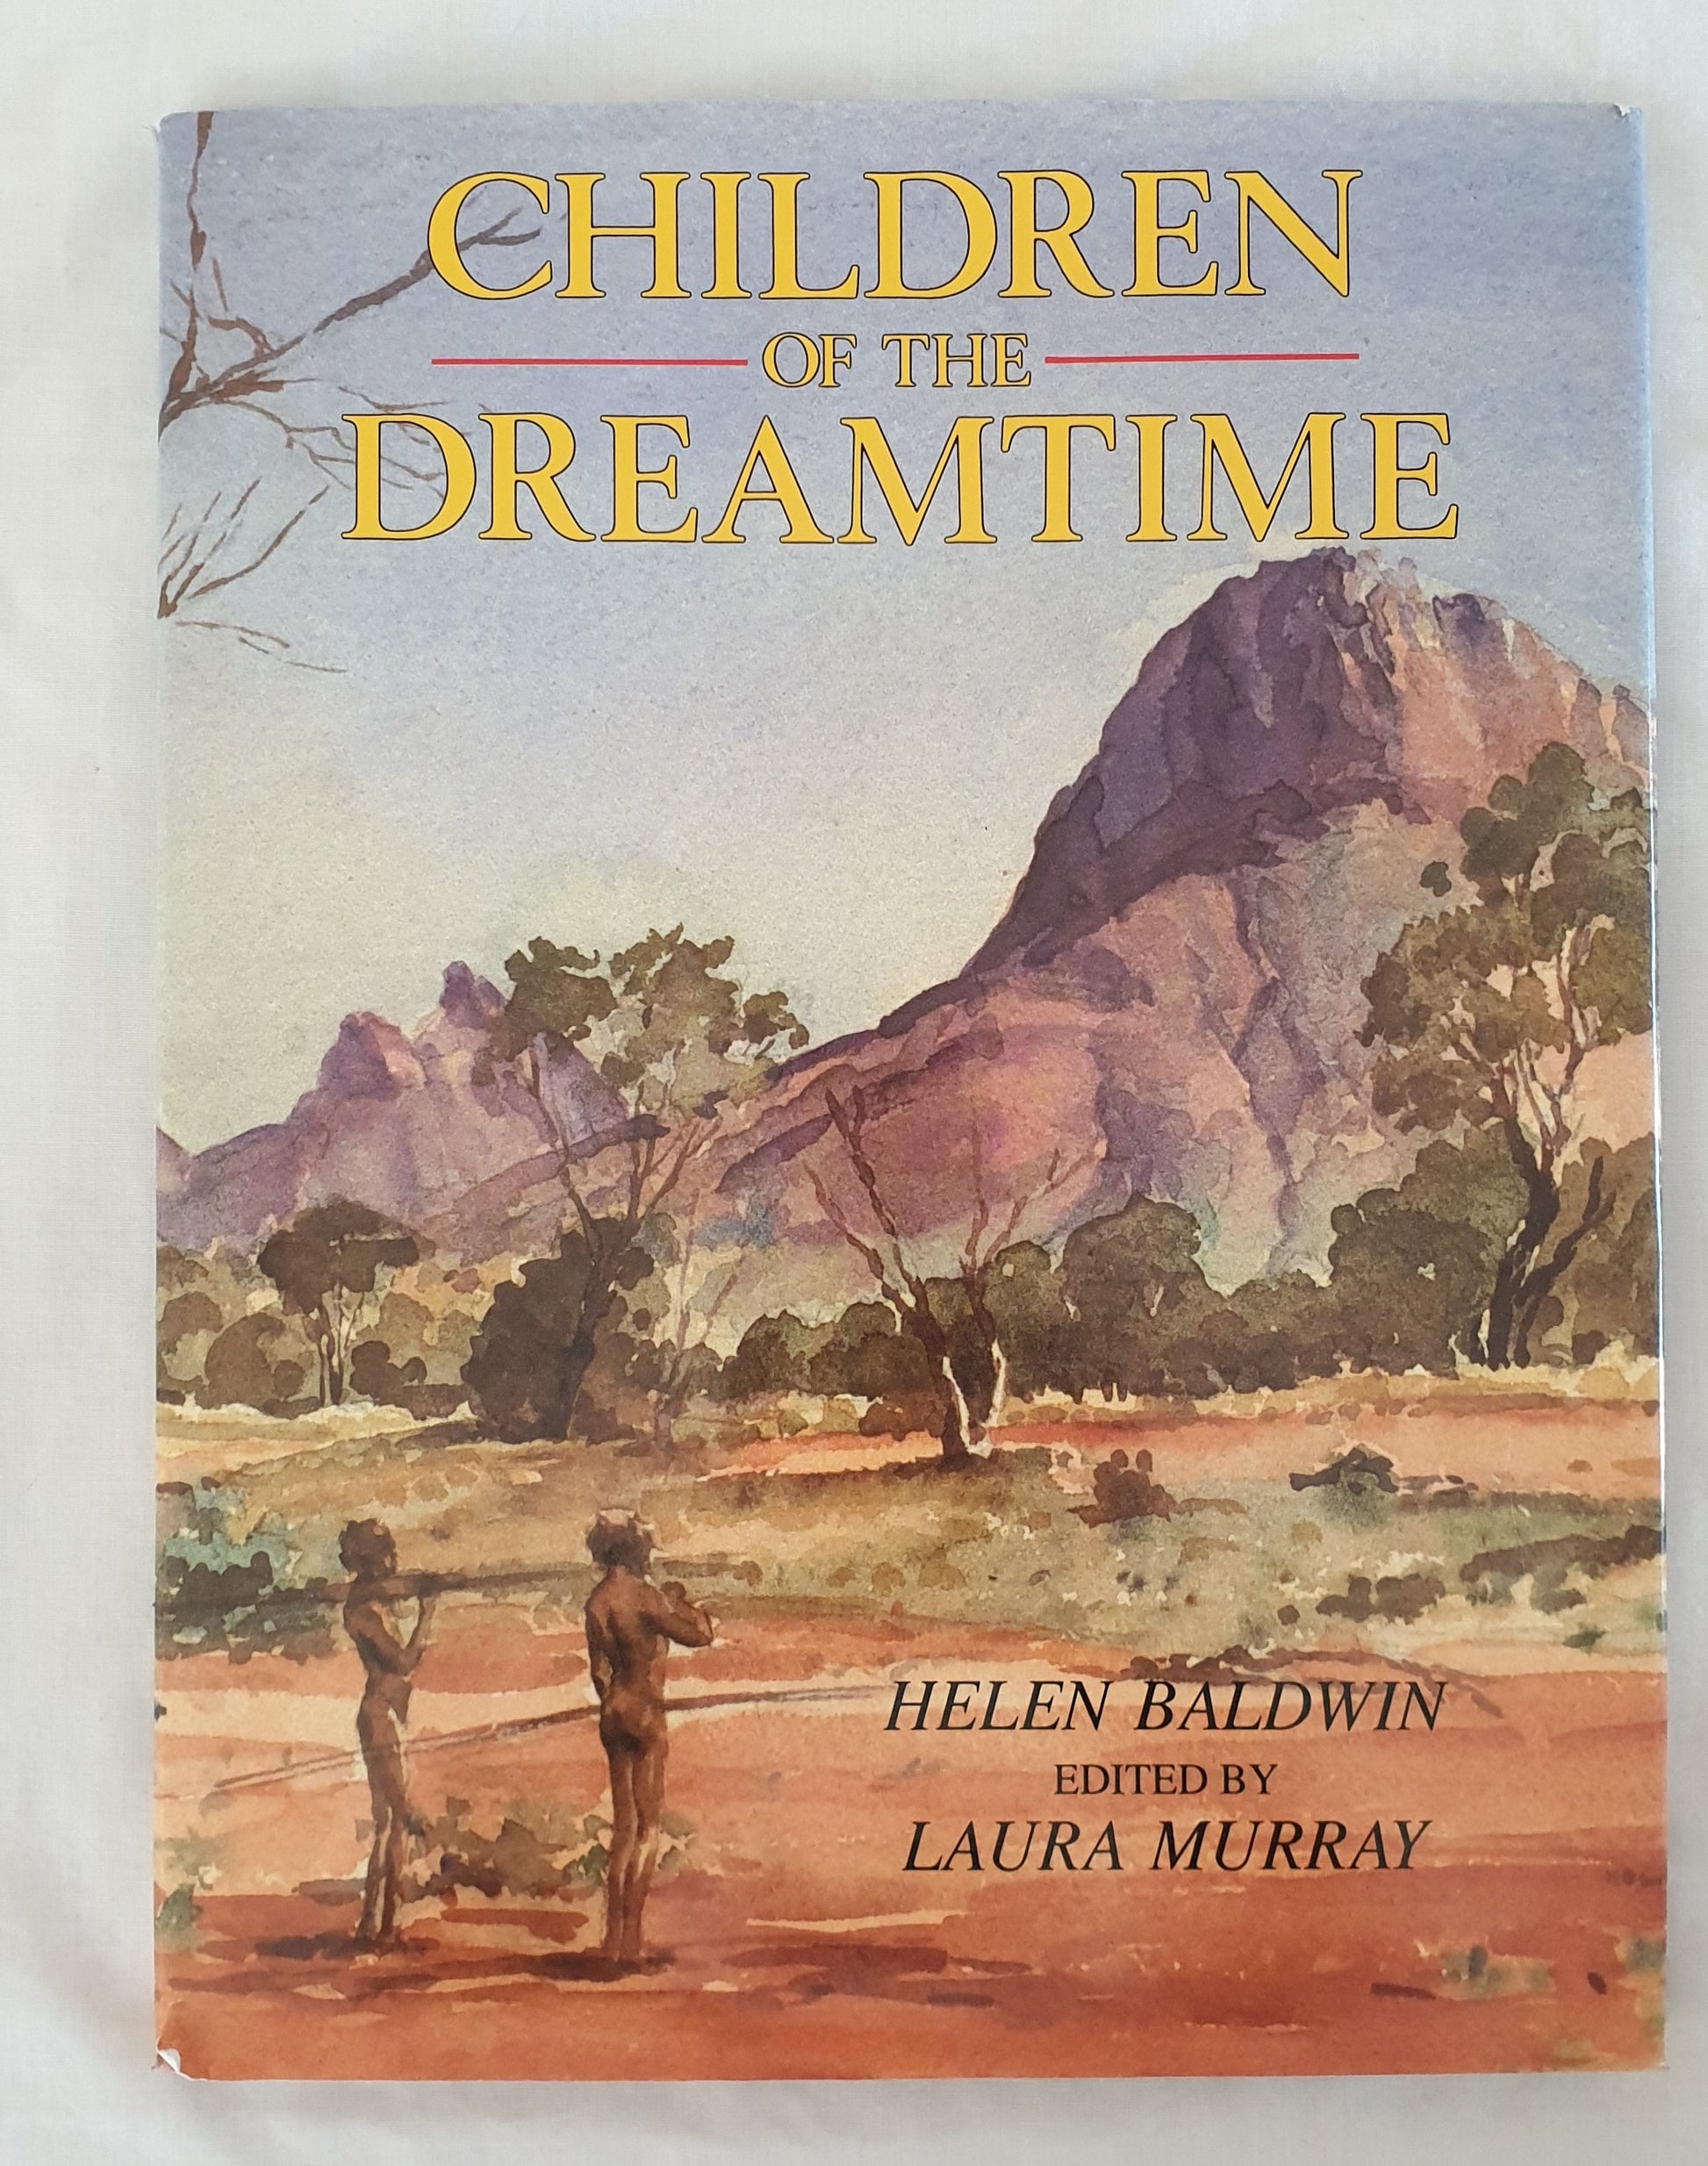 Children of the Dreamtime  by Helen Baldwin  Edited by Laura Murray